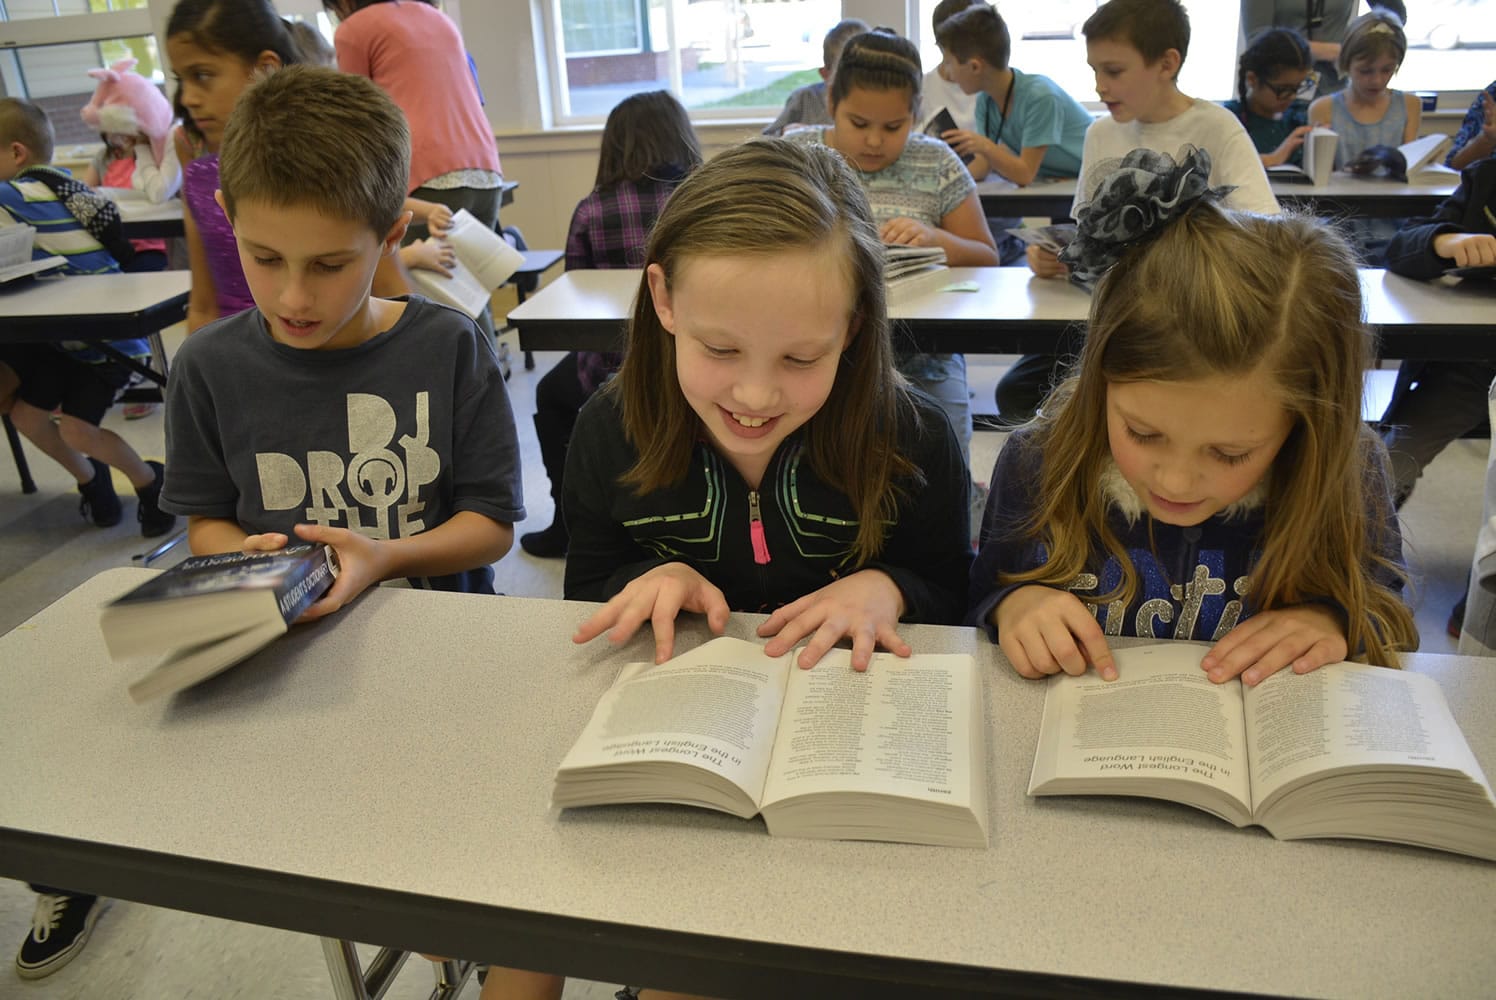 Washougal: Gause Elementary School third-graders Cameron Miller, from left, Chloe Baker and Peyton Del Carlo flip through the dictionaries they received from the Camas-Washougal Rotary.